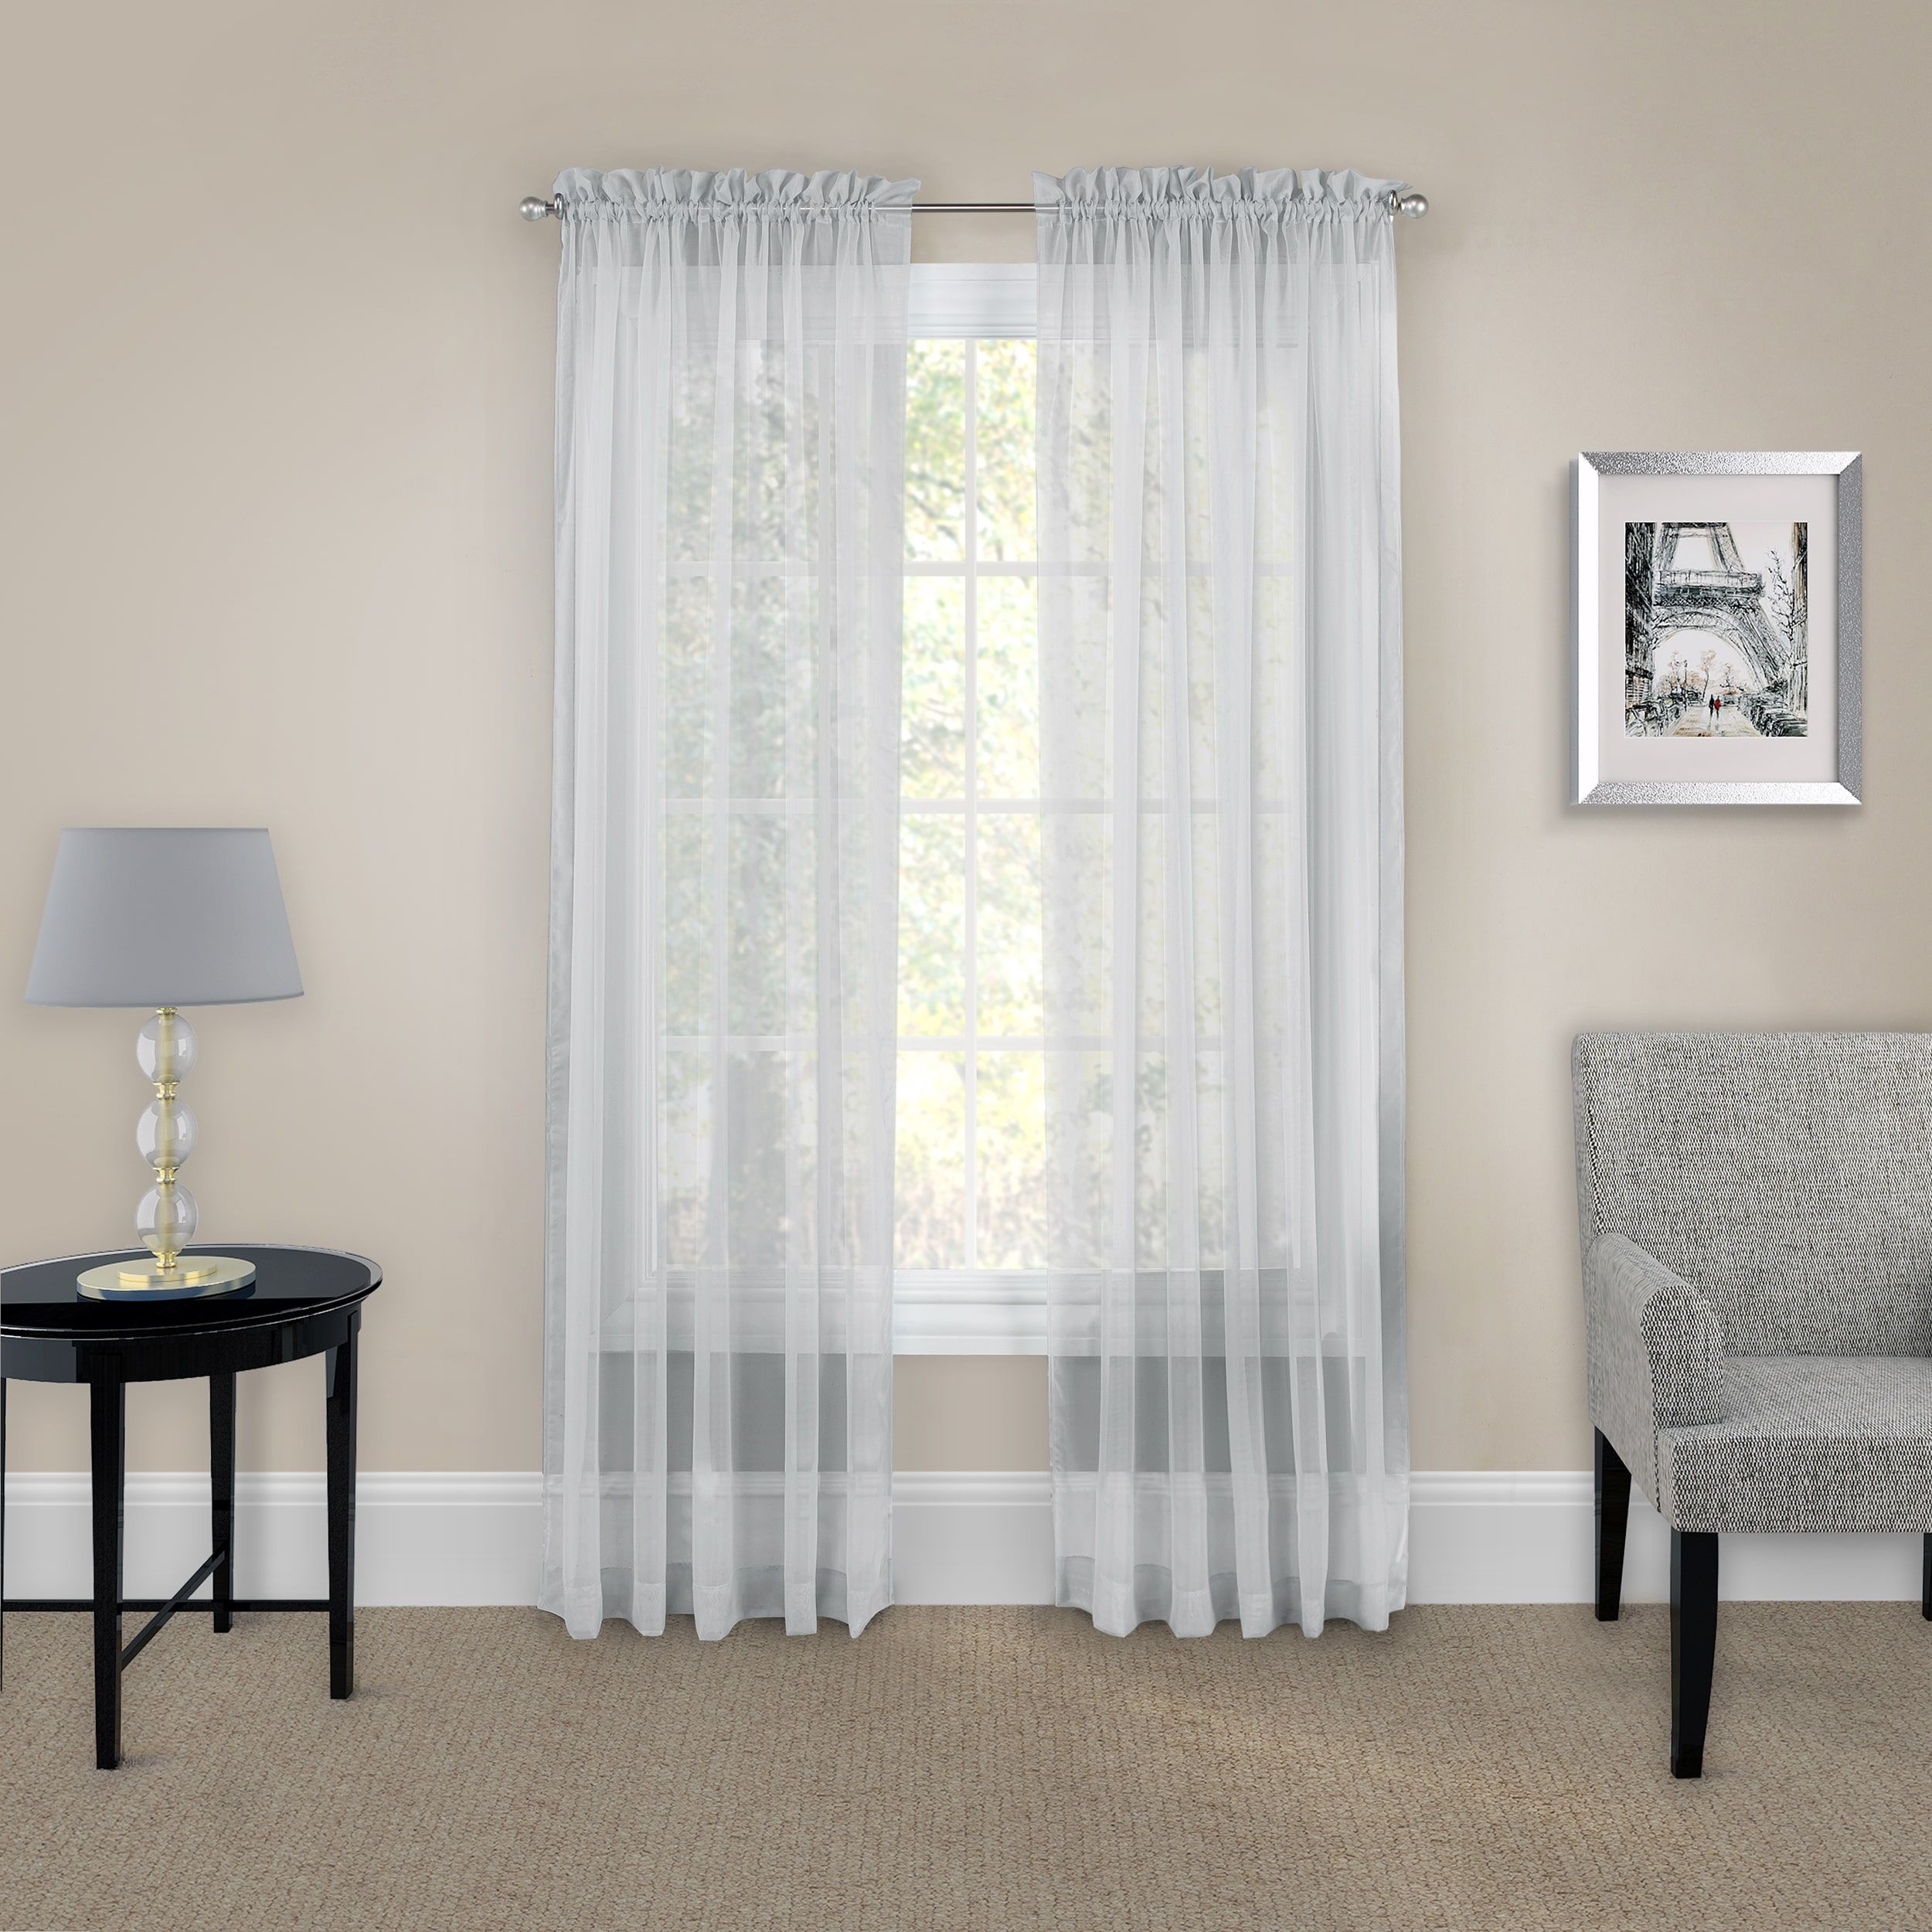 Pairs To Go Victoria Voile Curtain Panel Pair With Pairs To Go Victoria Voile Curtain Panel Pairs (View 1 of 20)